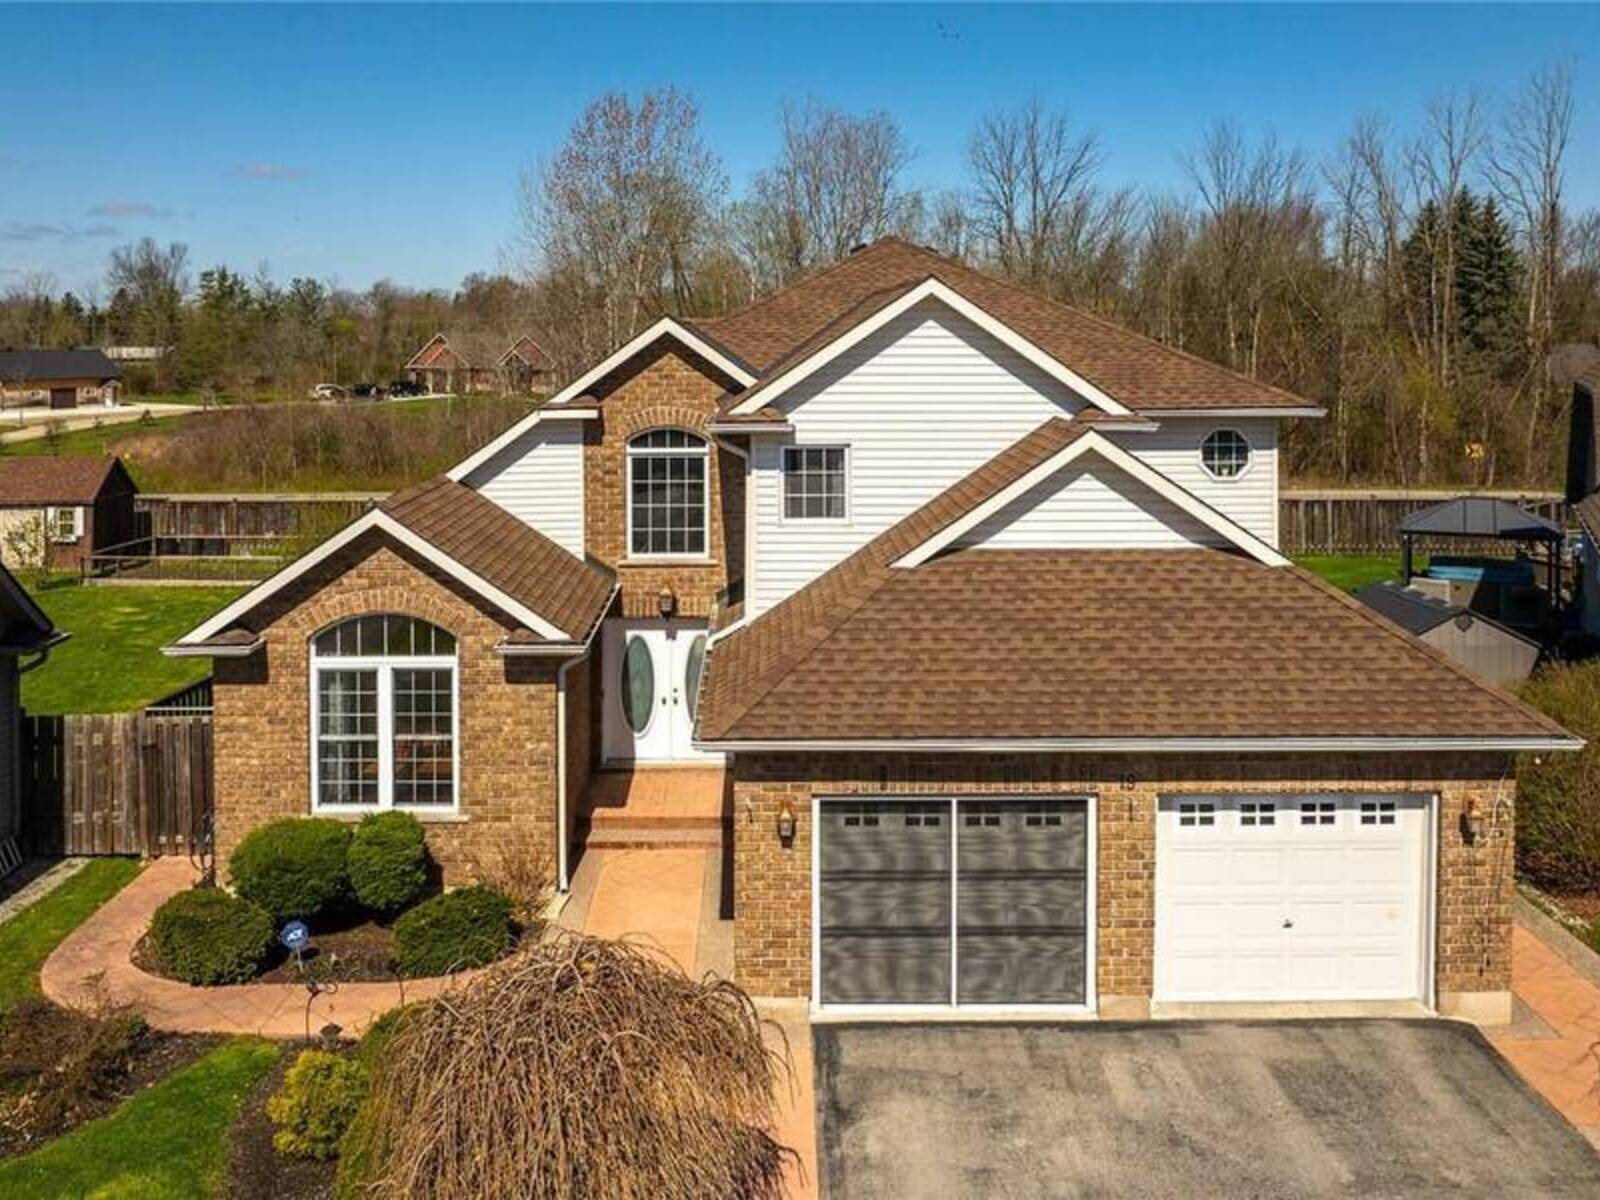 19 Meadowbrook Court, Dunnville, Ontario N1A 3H6